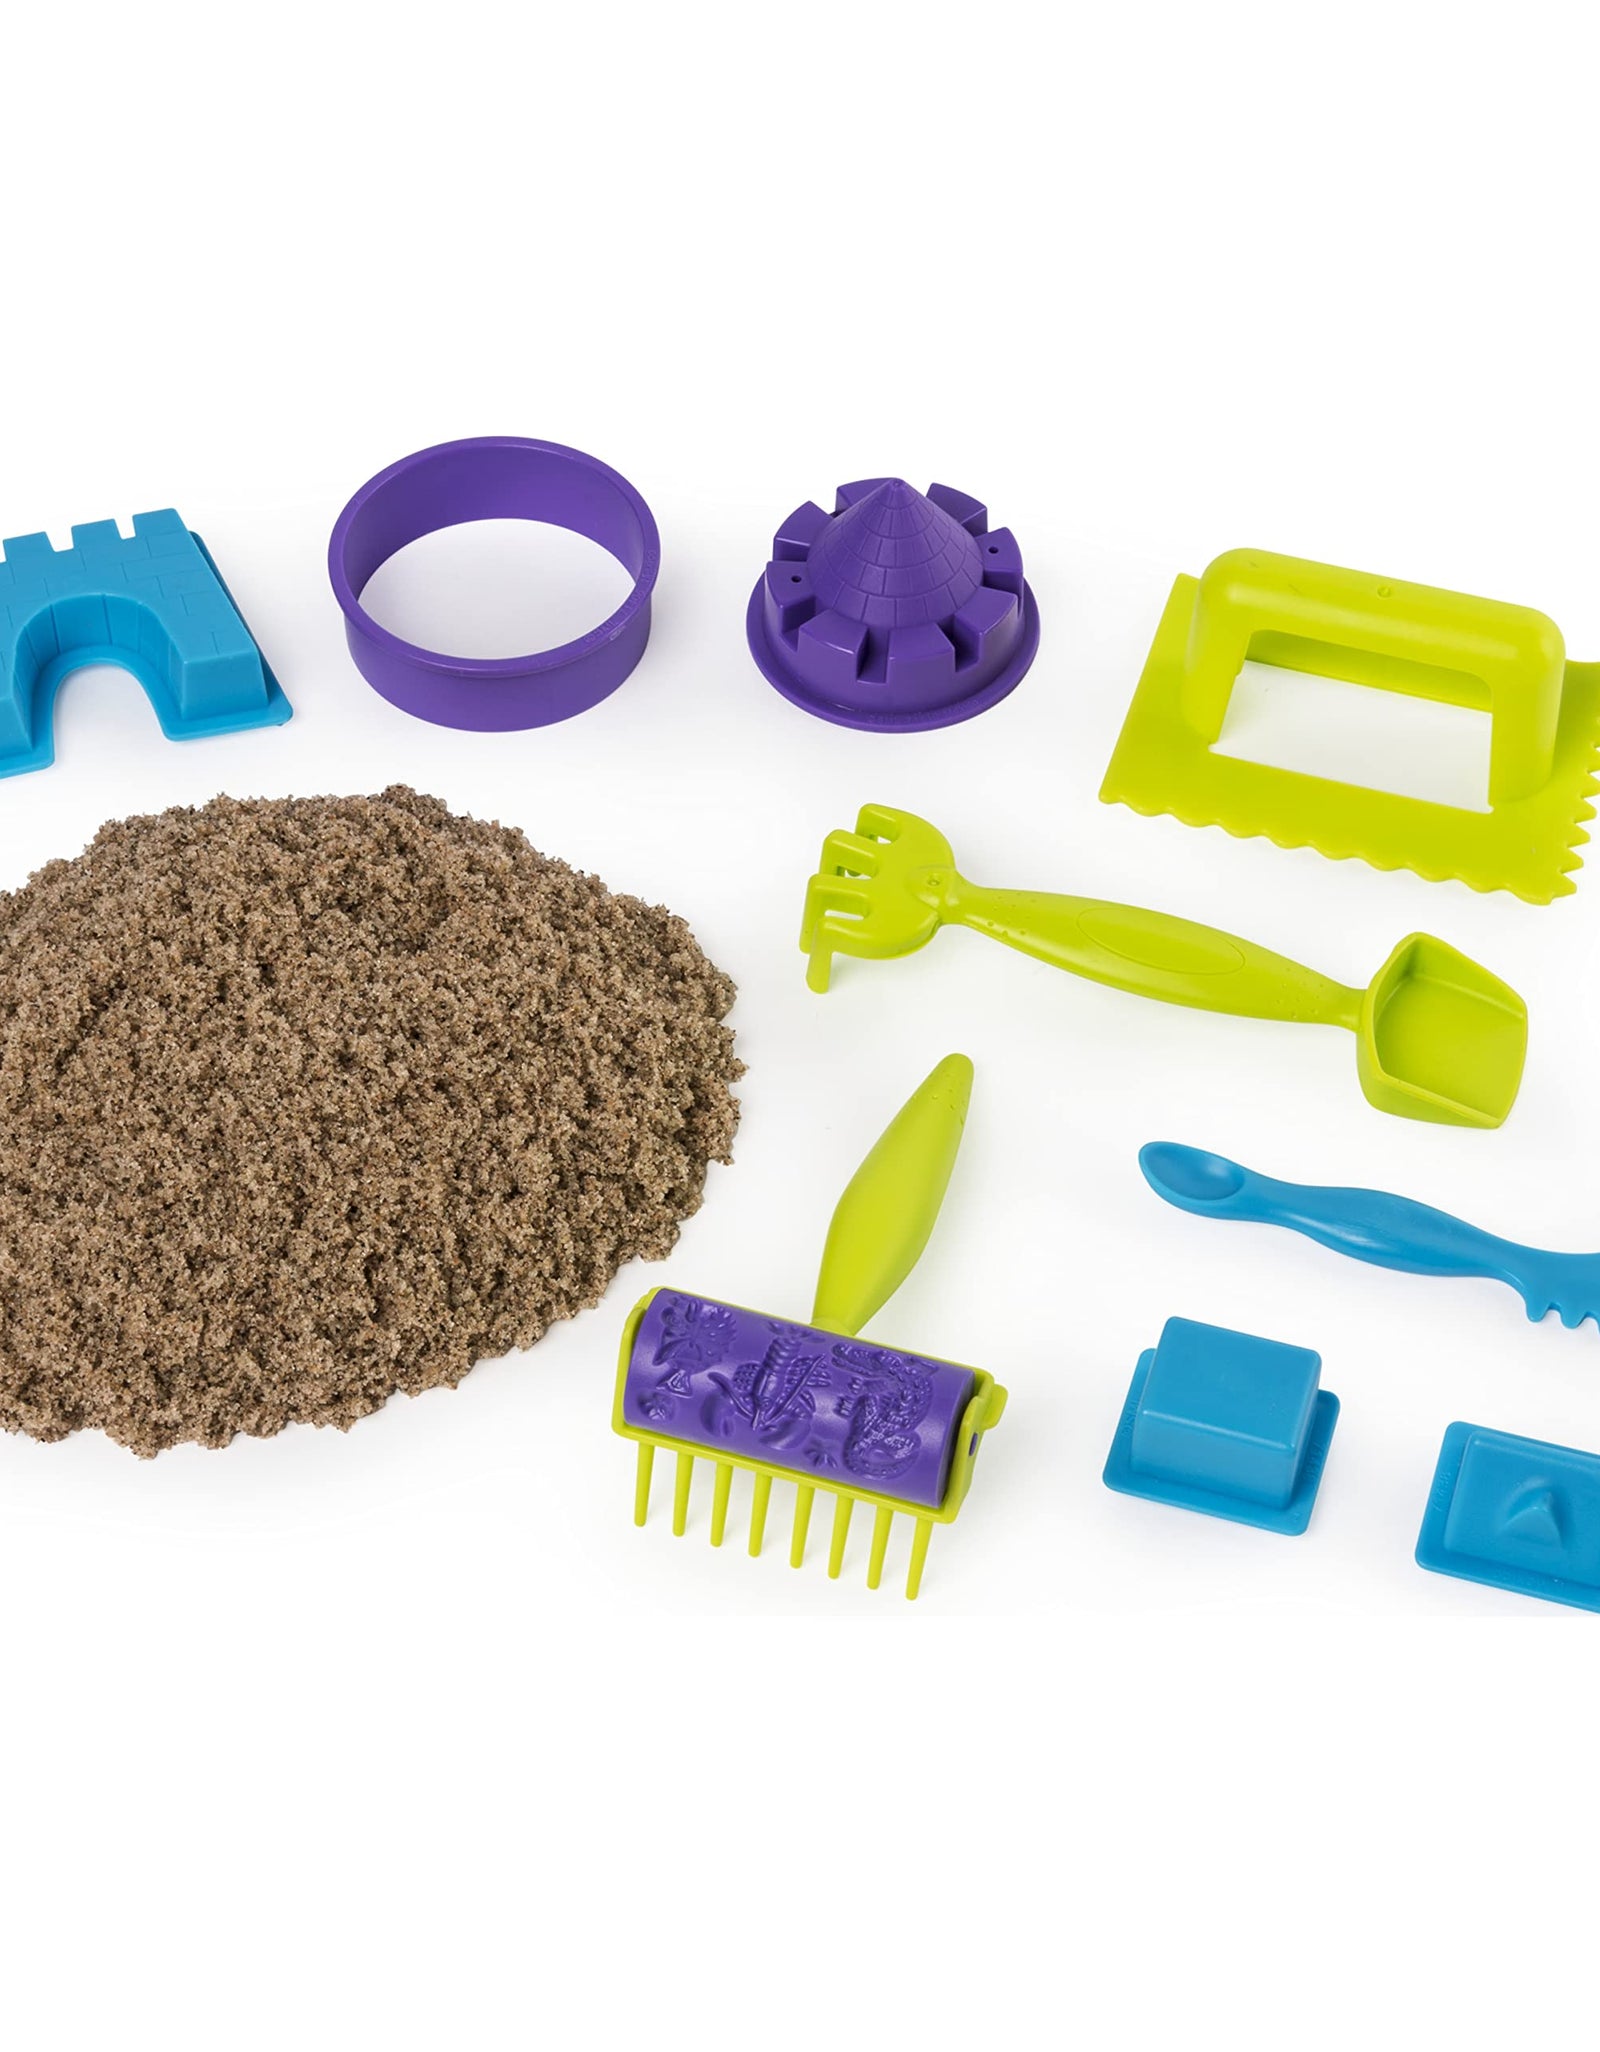 Kinetic Sand, The Original Moldable Play Sand, 3.25lbs Beach Sand, Sensory Toys for Kids Ages 3 and up